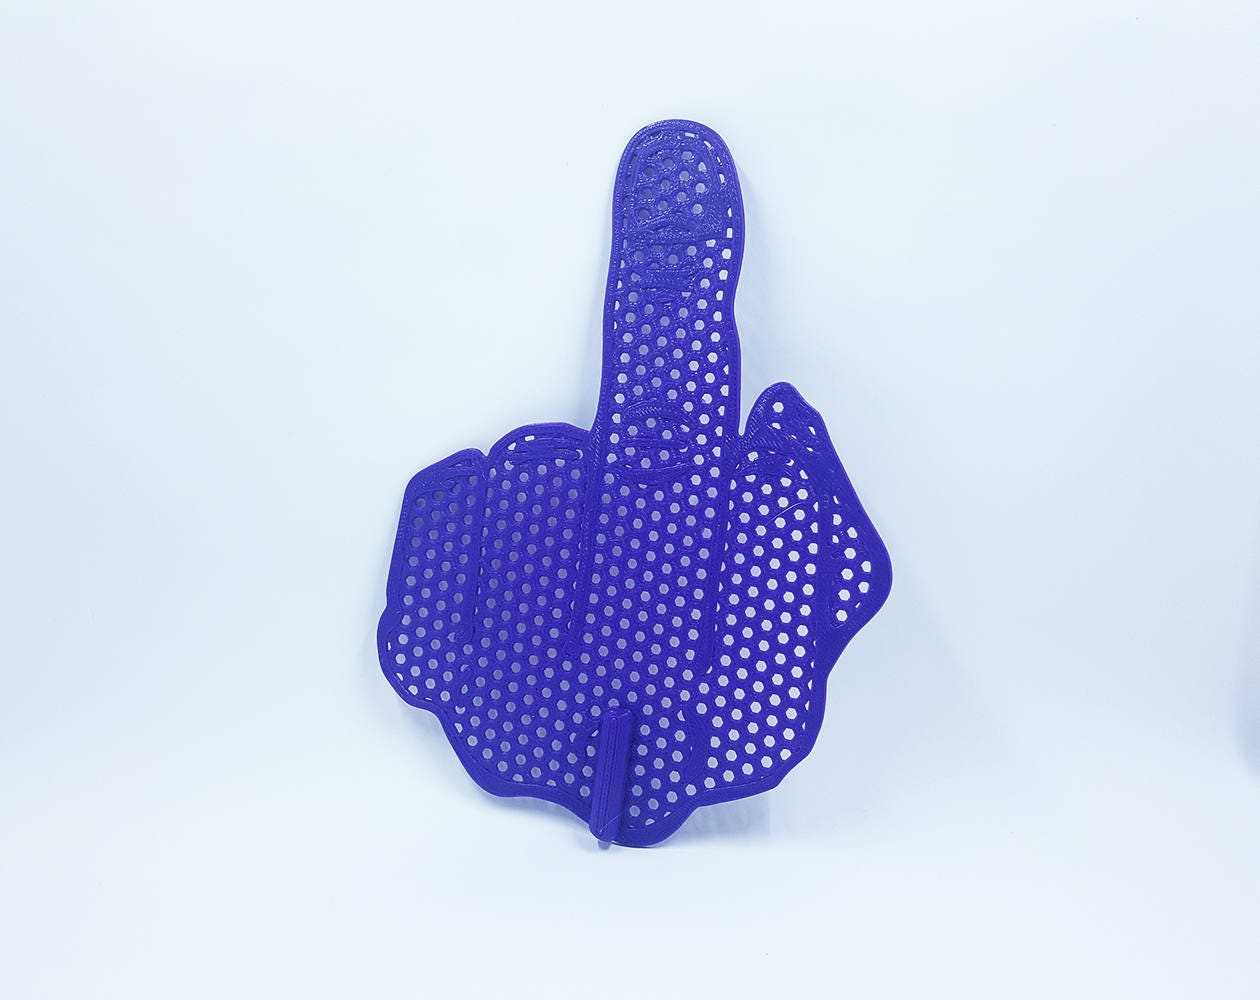 Kill insects in style 3D Printed F U Fly Swatter Middle Finger Insect Killer 